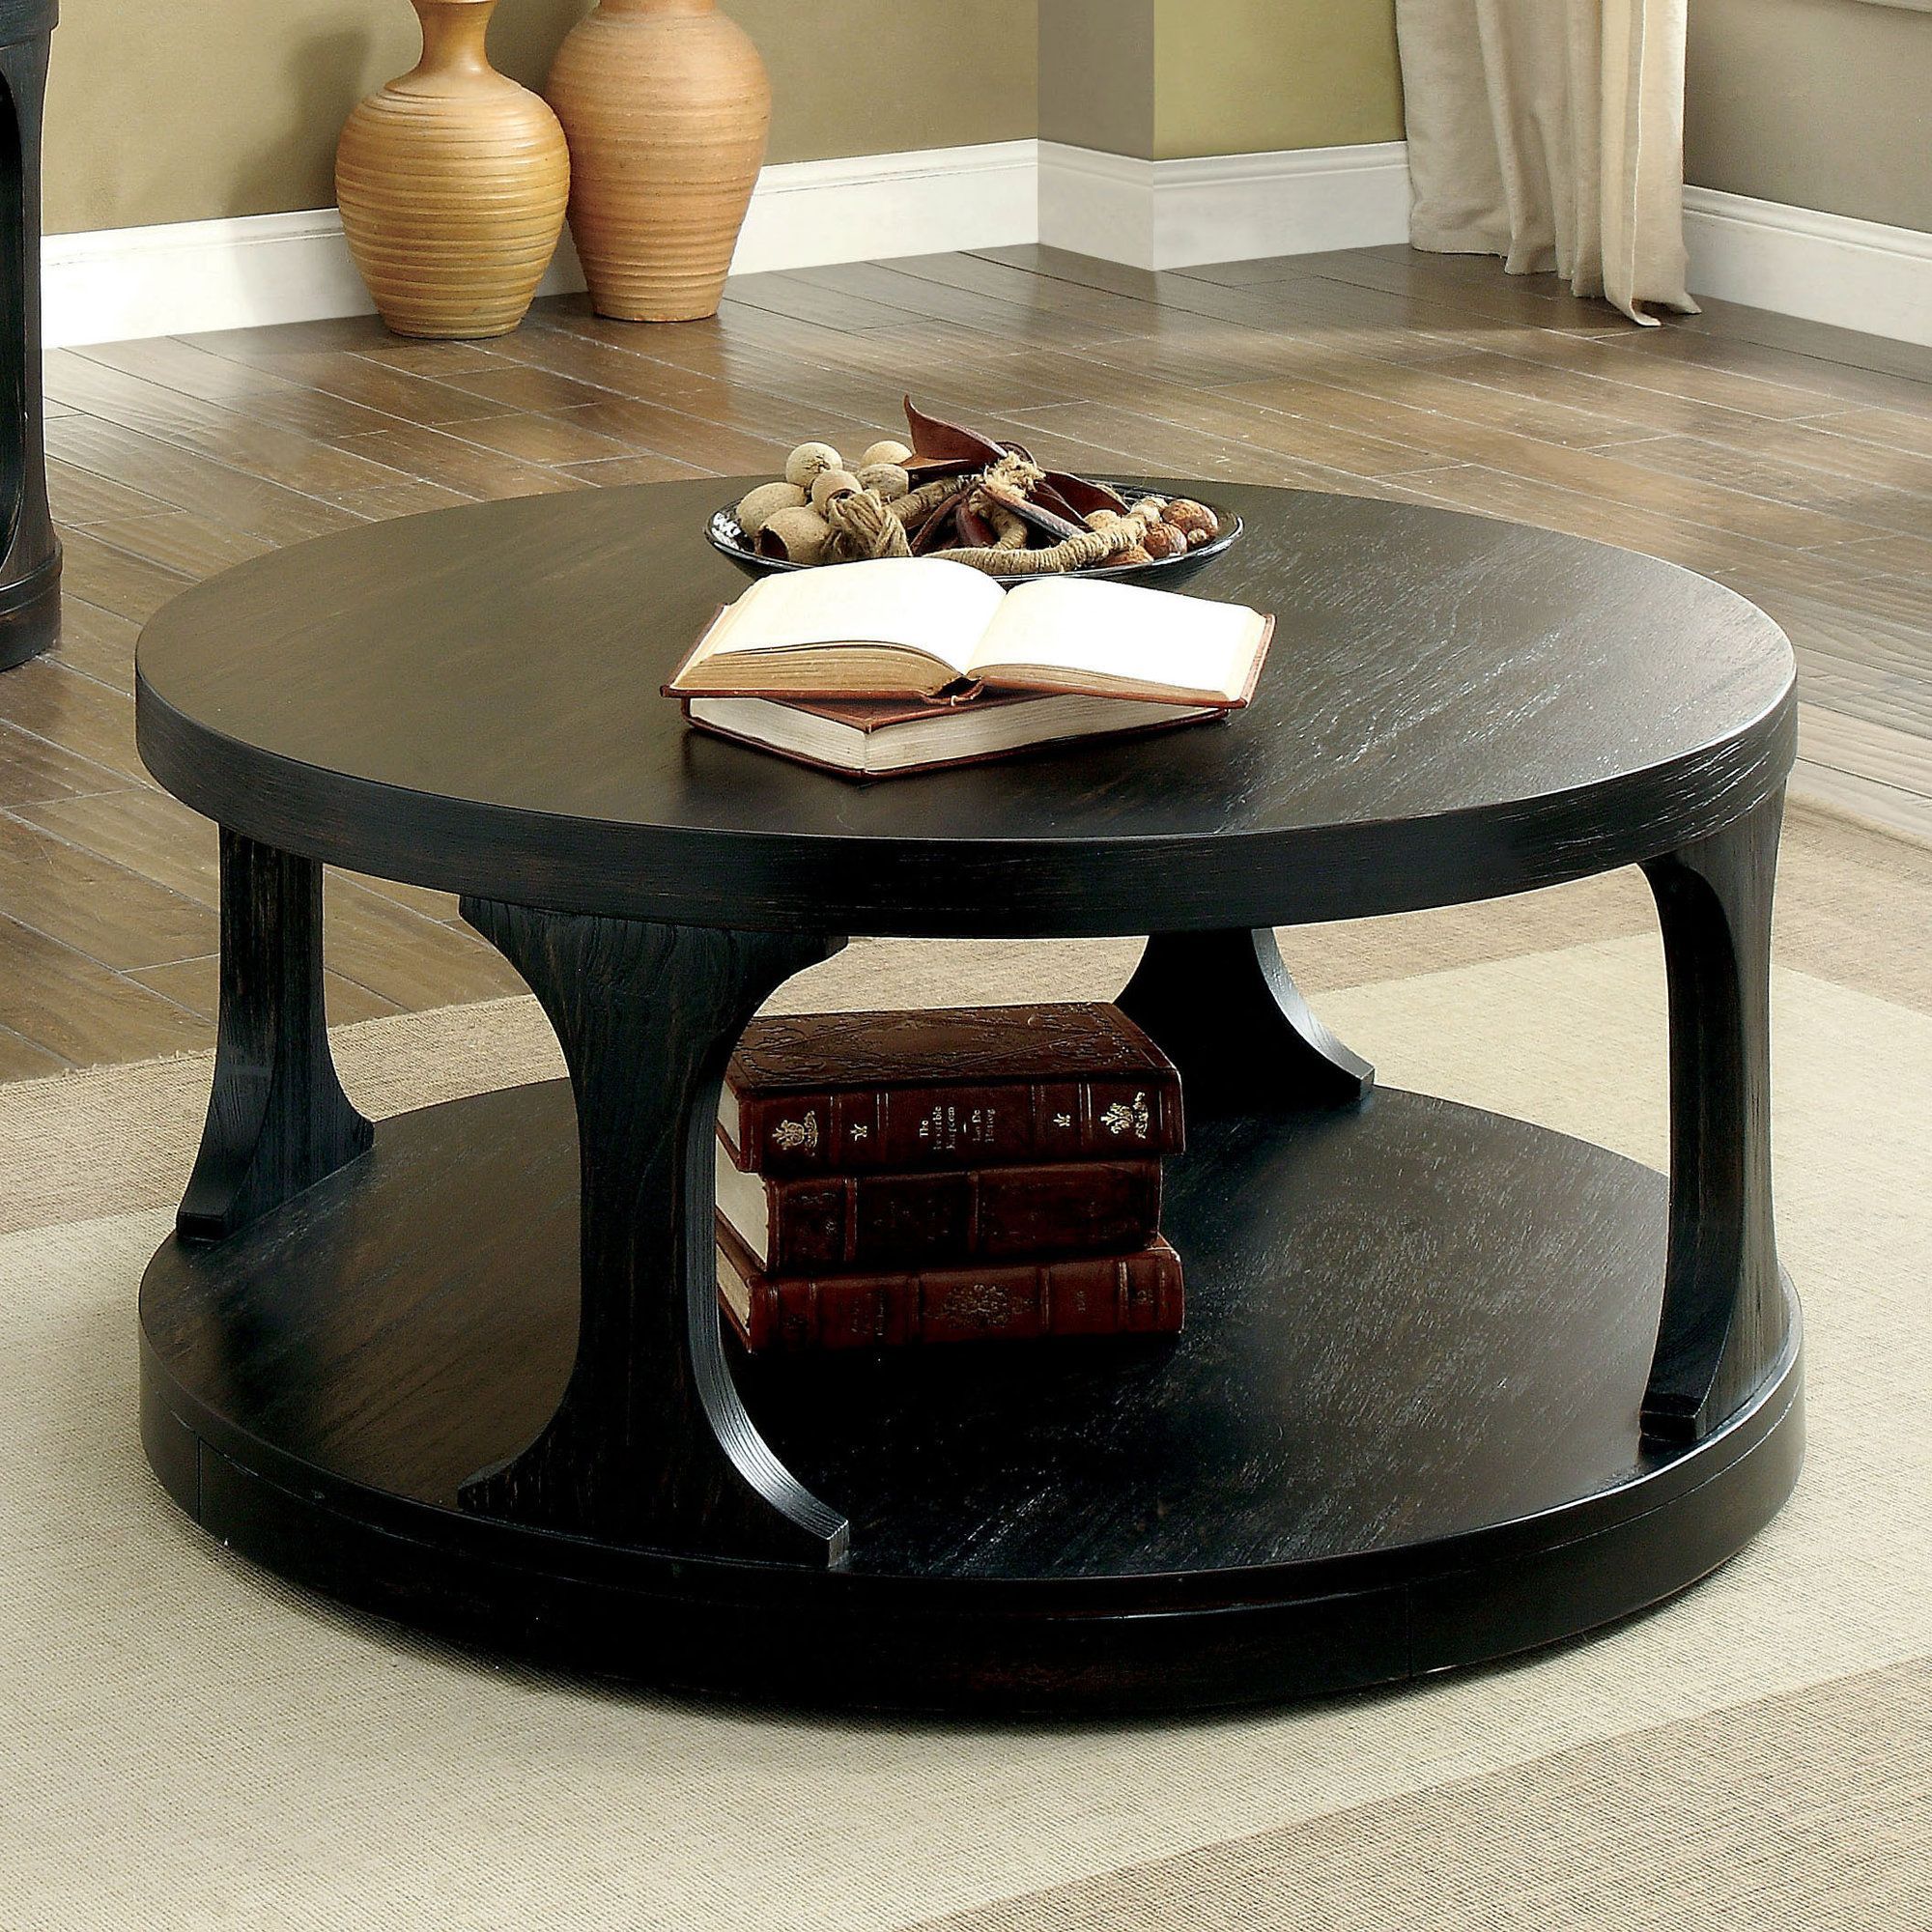 Bring A Touch Of Elegance To Your Home With A Black Circle Coffee Table Regarding Full Black Round Coffee Tables (Gallery 10 of 20)